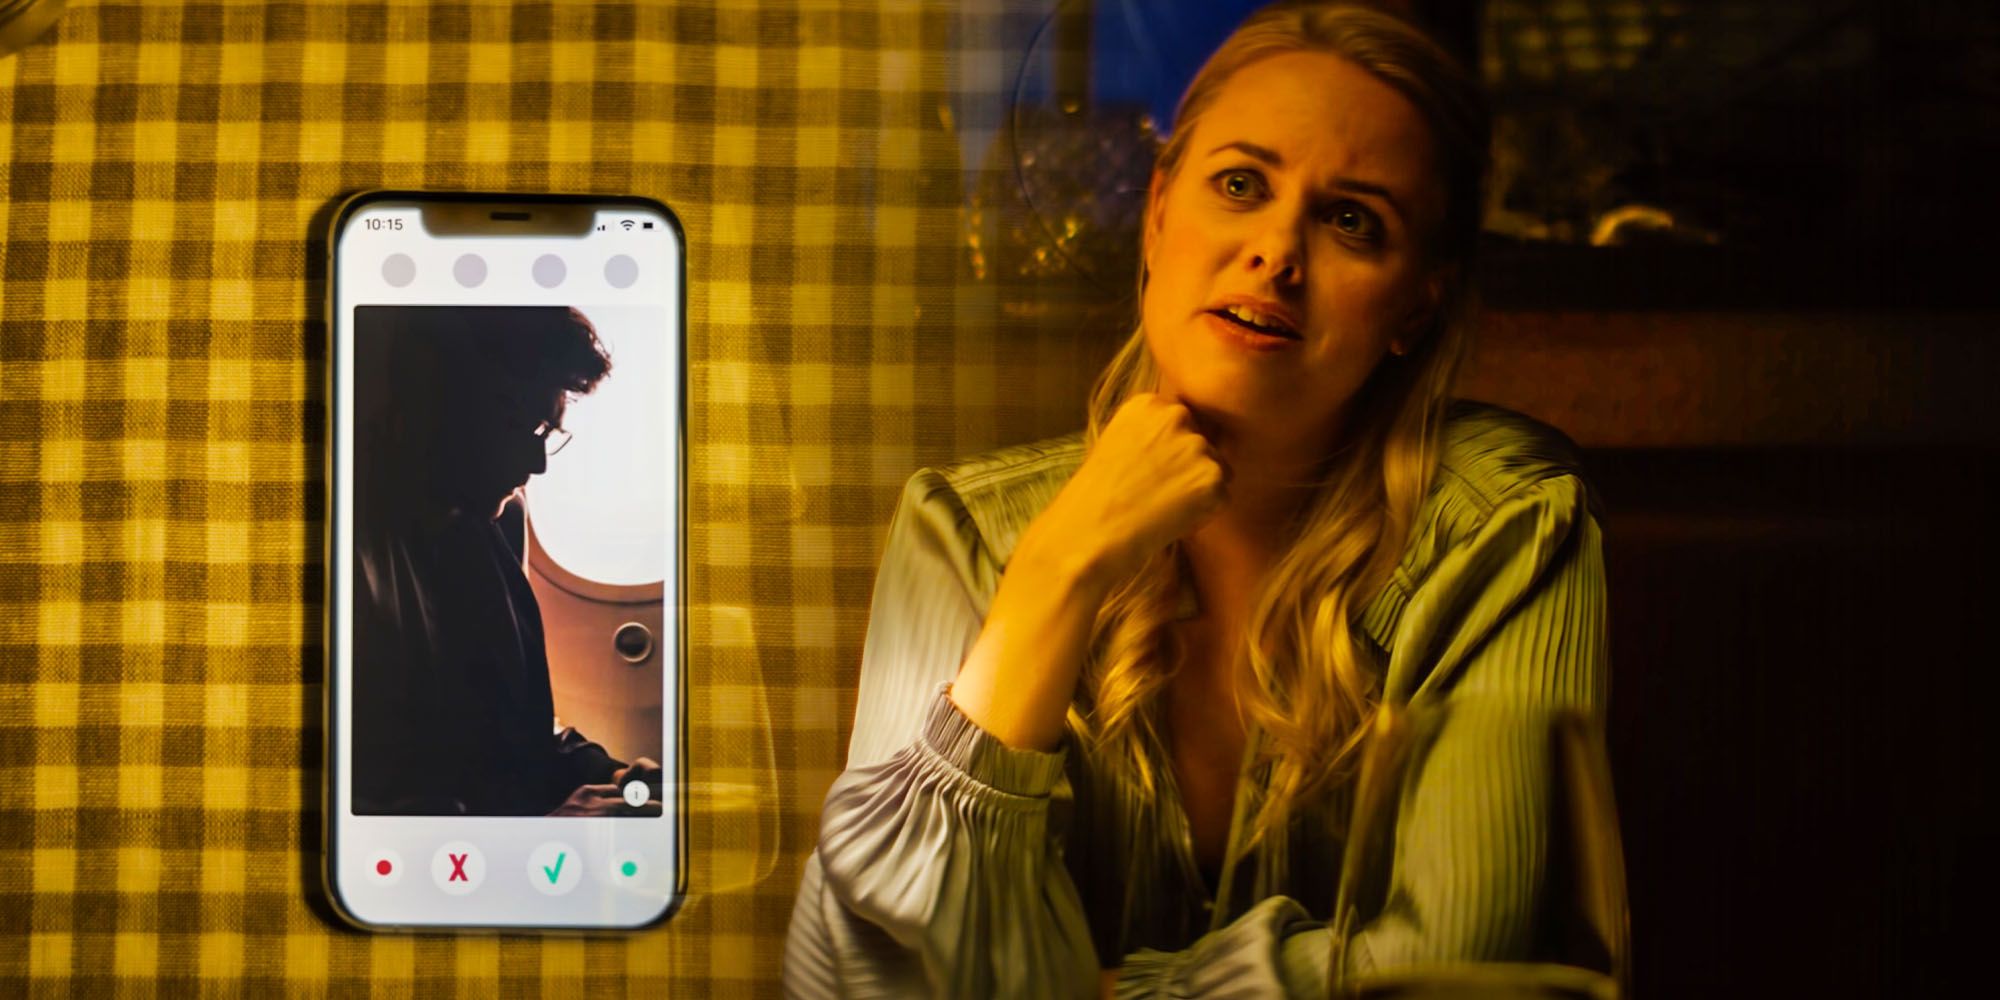 The Tinder Swindler Updates: What Happened To Cecilie Since The Documentary